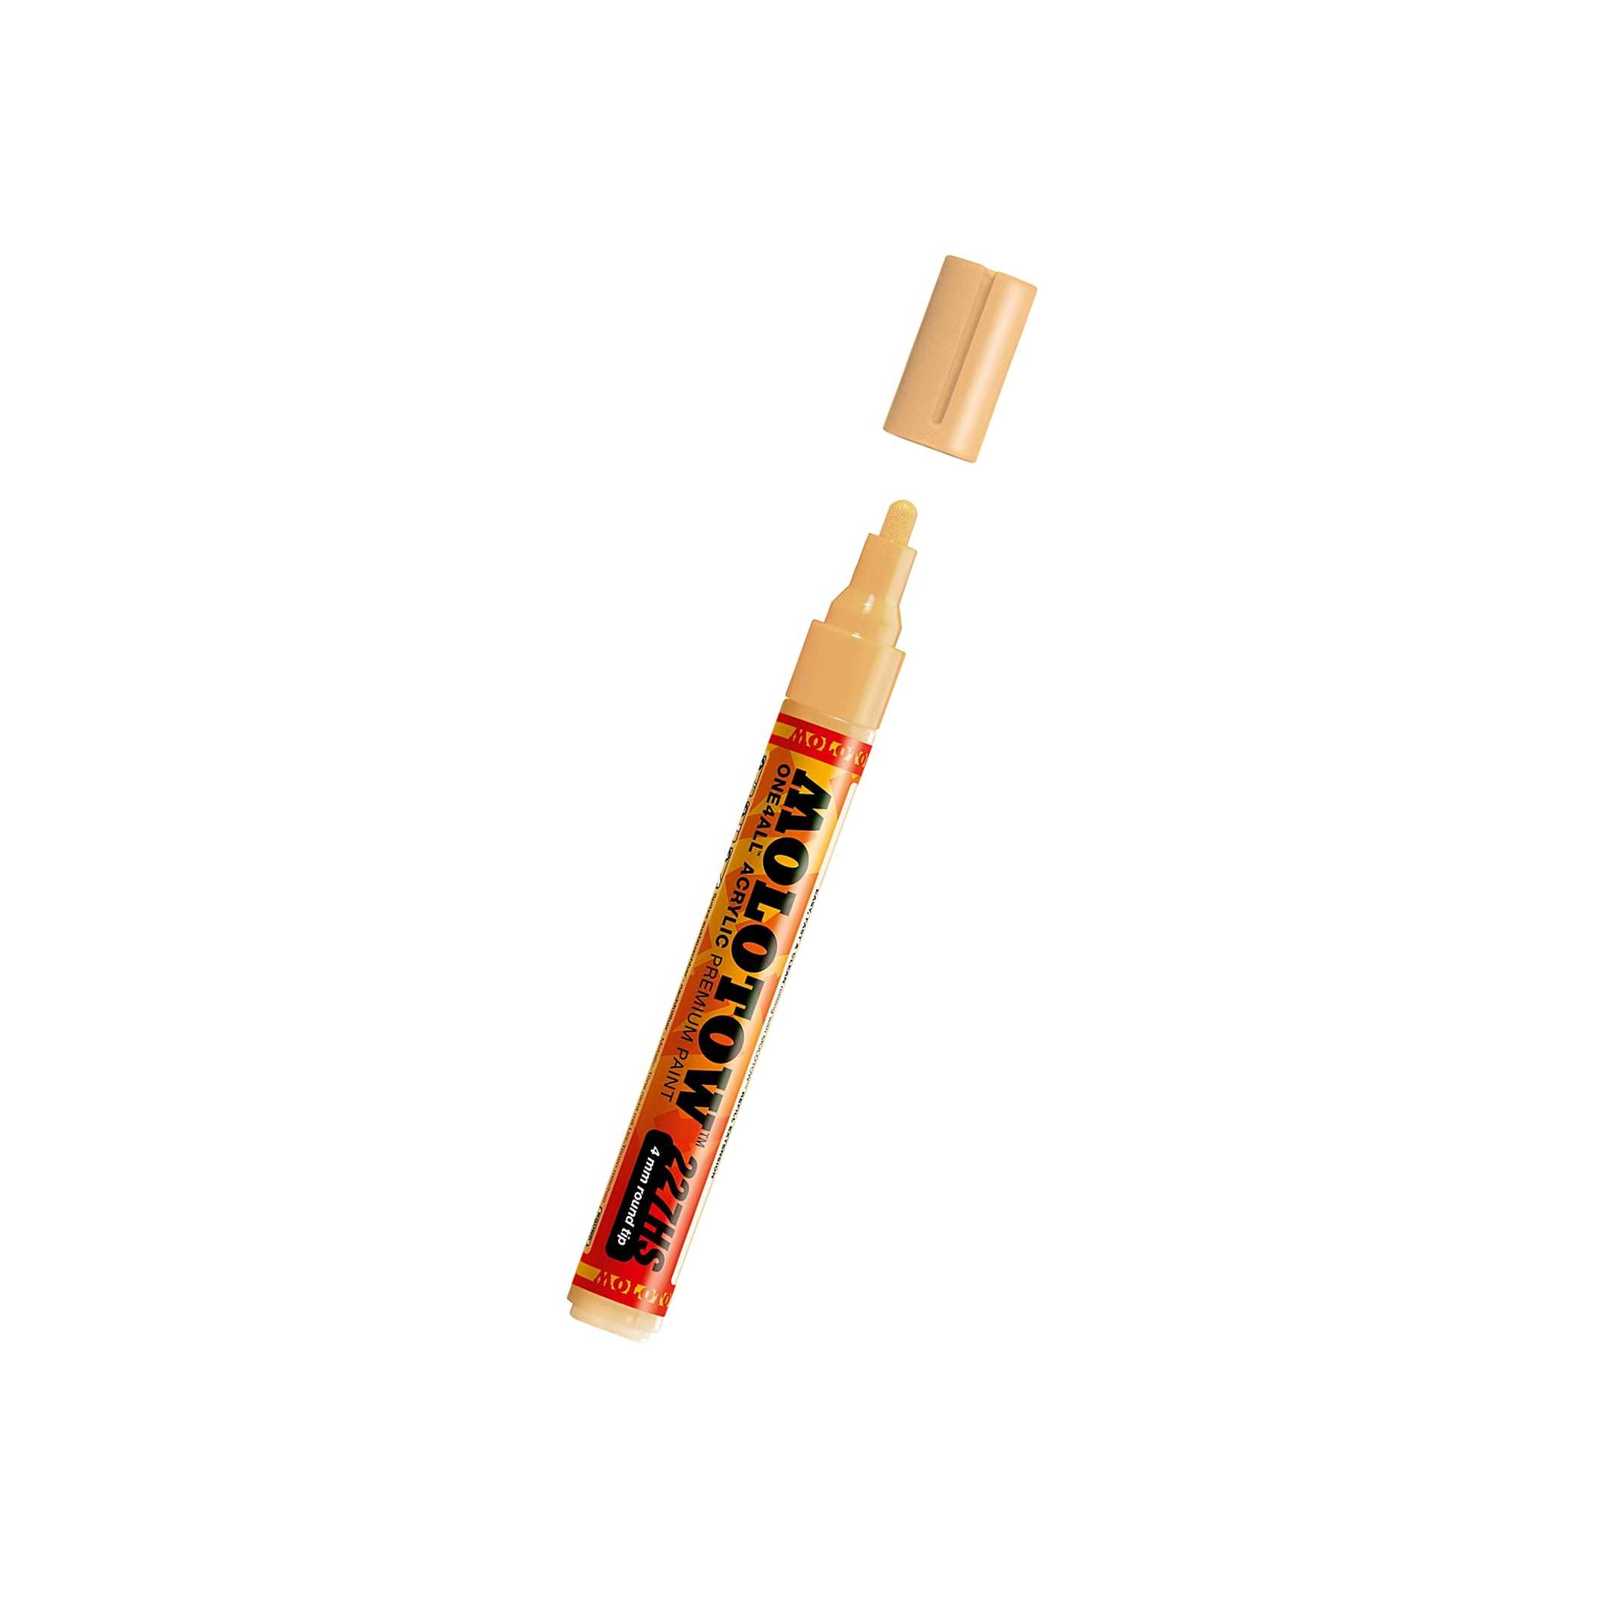 Molotow One4All Acrylic Paint Marker, 4Mm, Sahara Beige Pastel, 1 Each 227.22